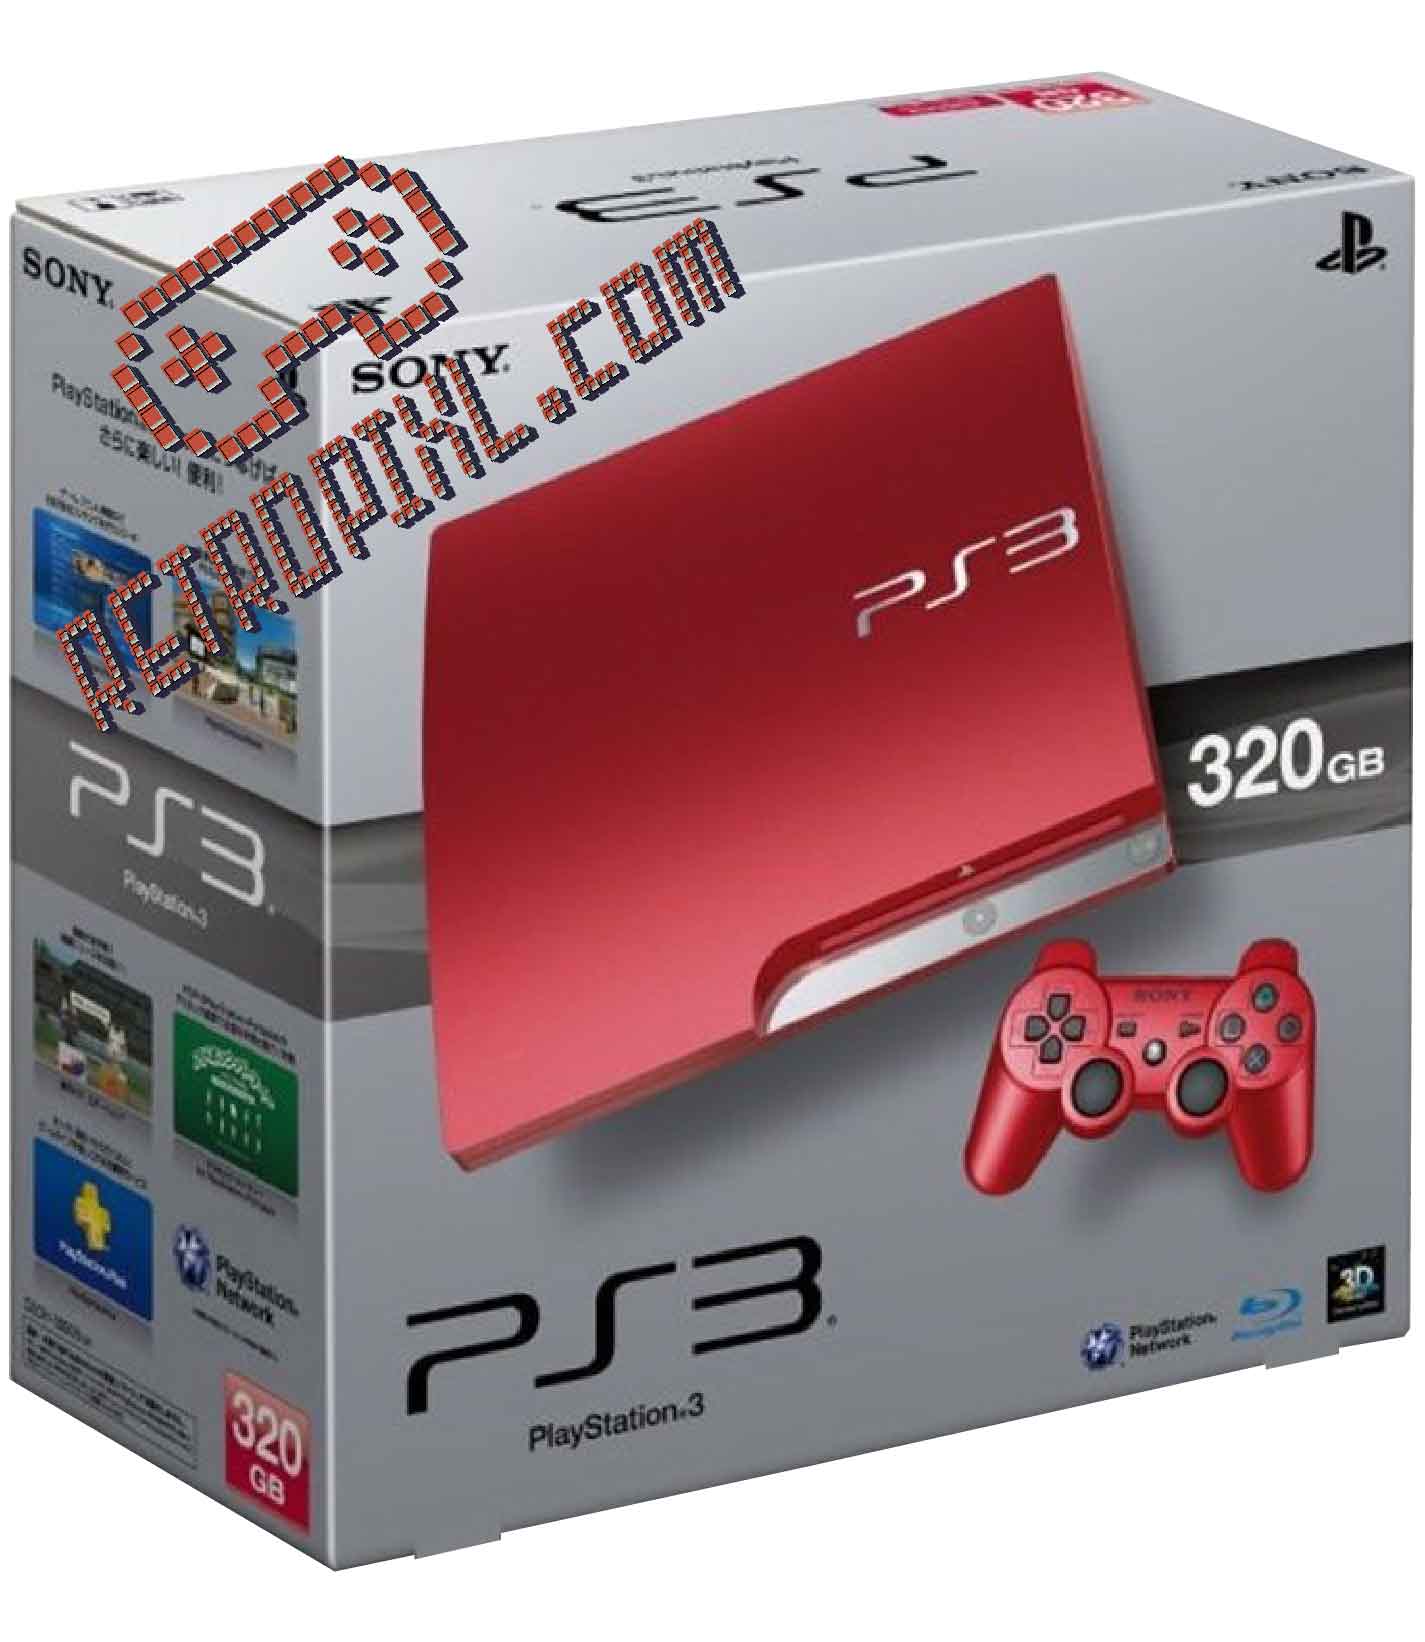 ps3 special edition